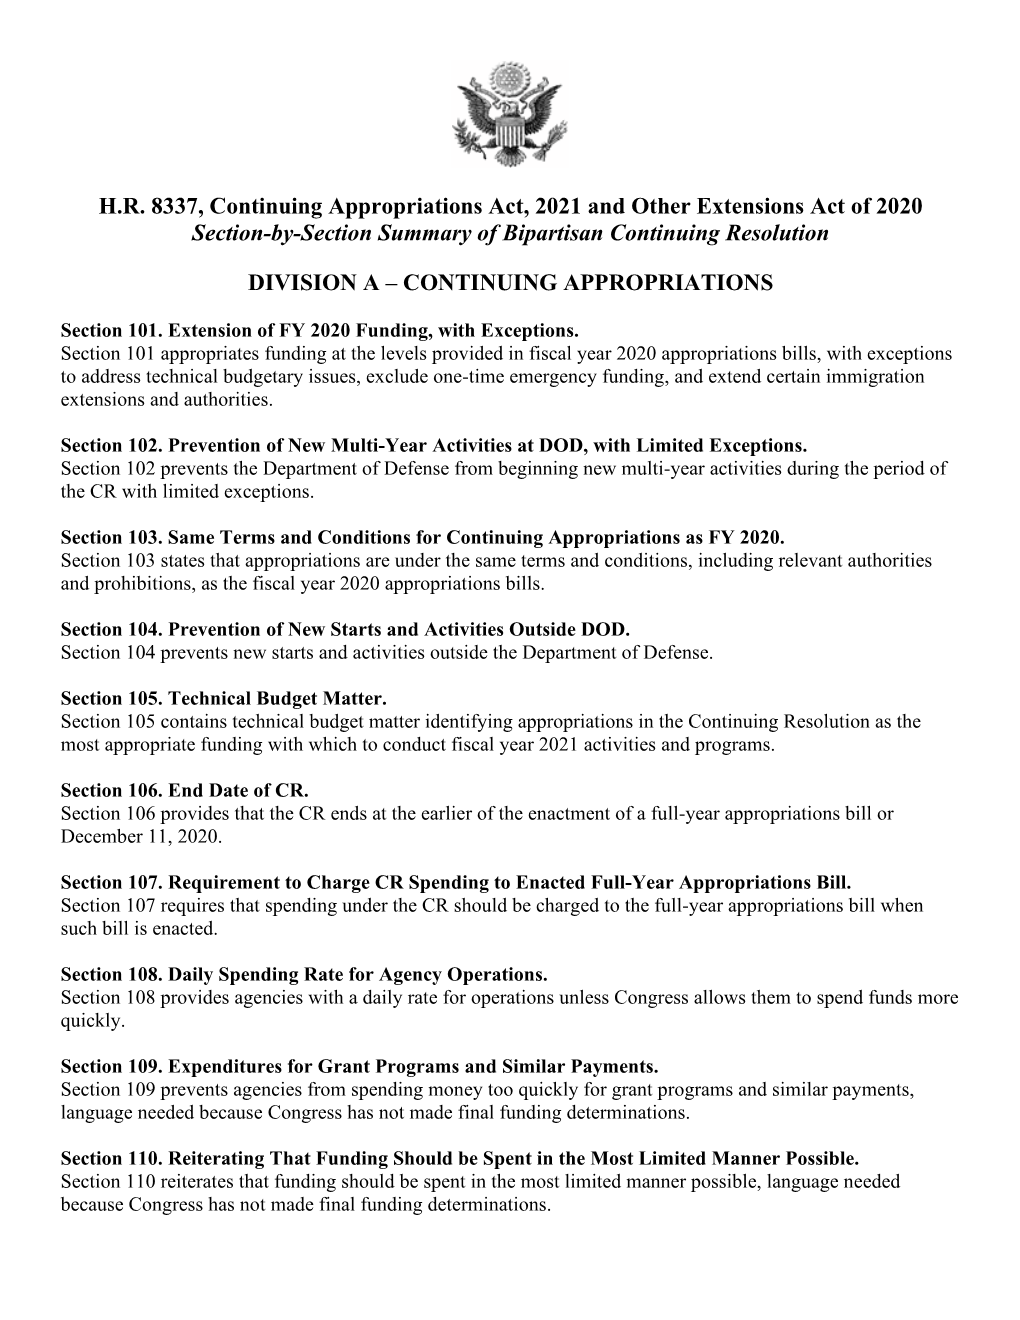 House Continuing Appropriations Act 2021